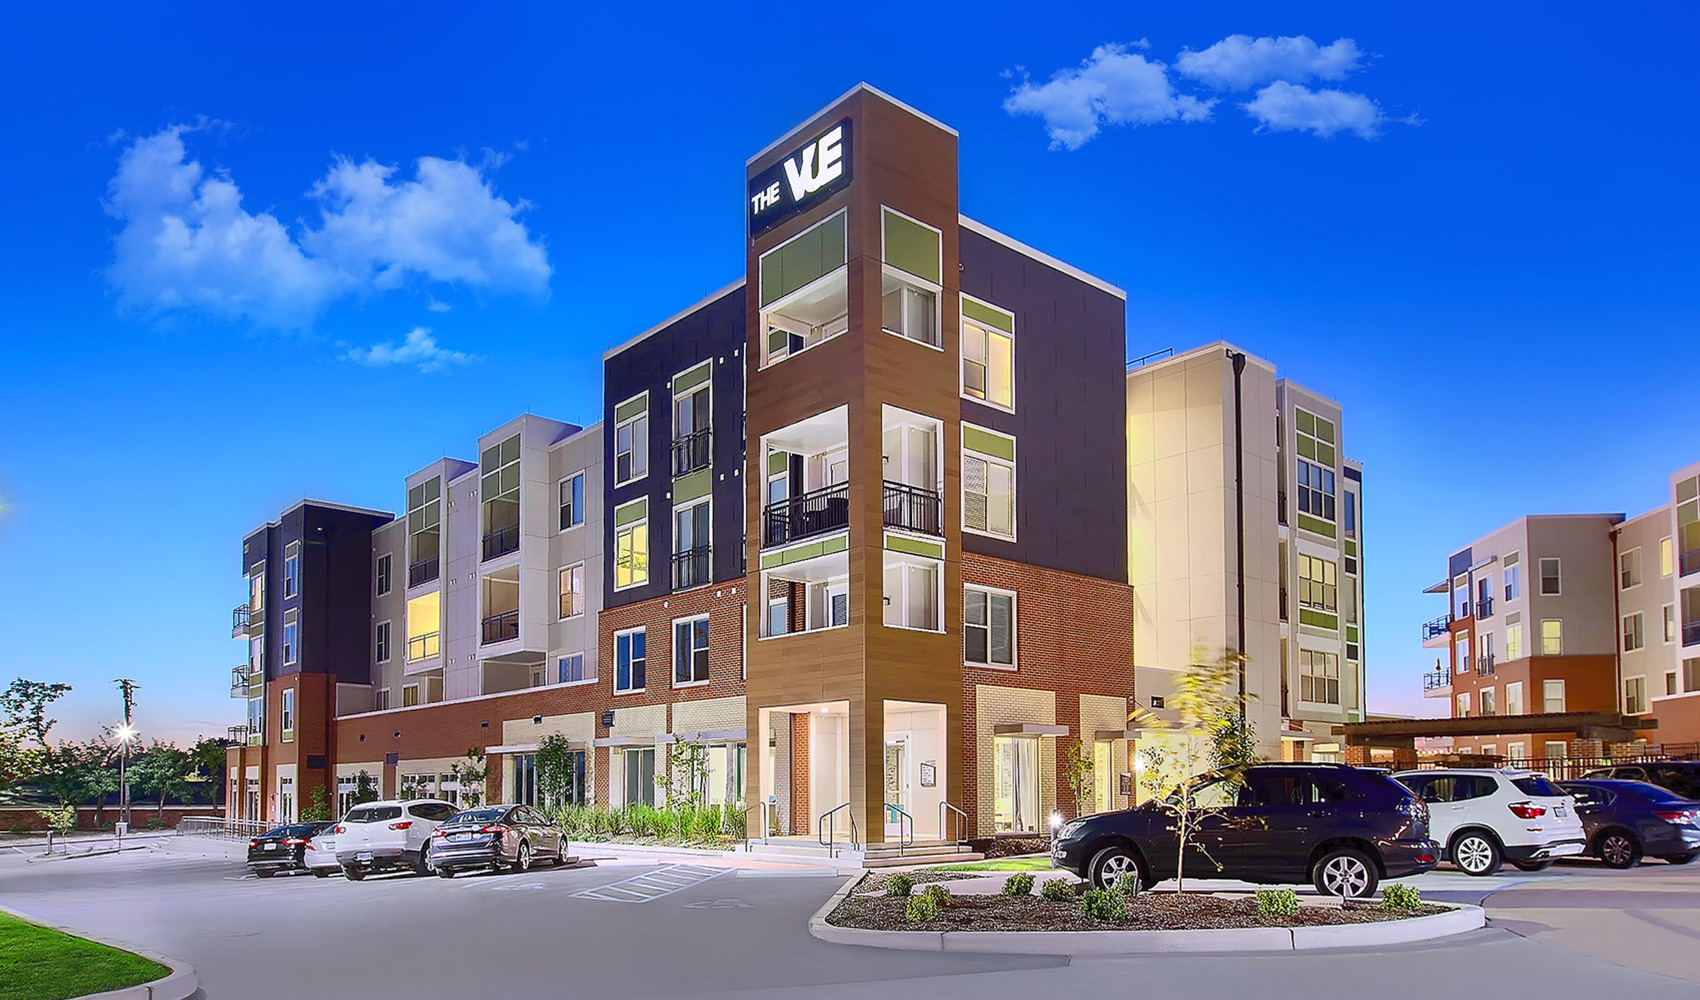 Exterior Building at The Vue at Creve Coeur Apartments